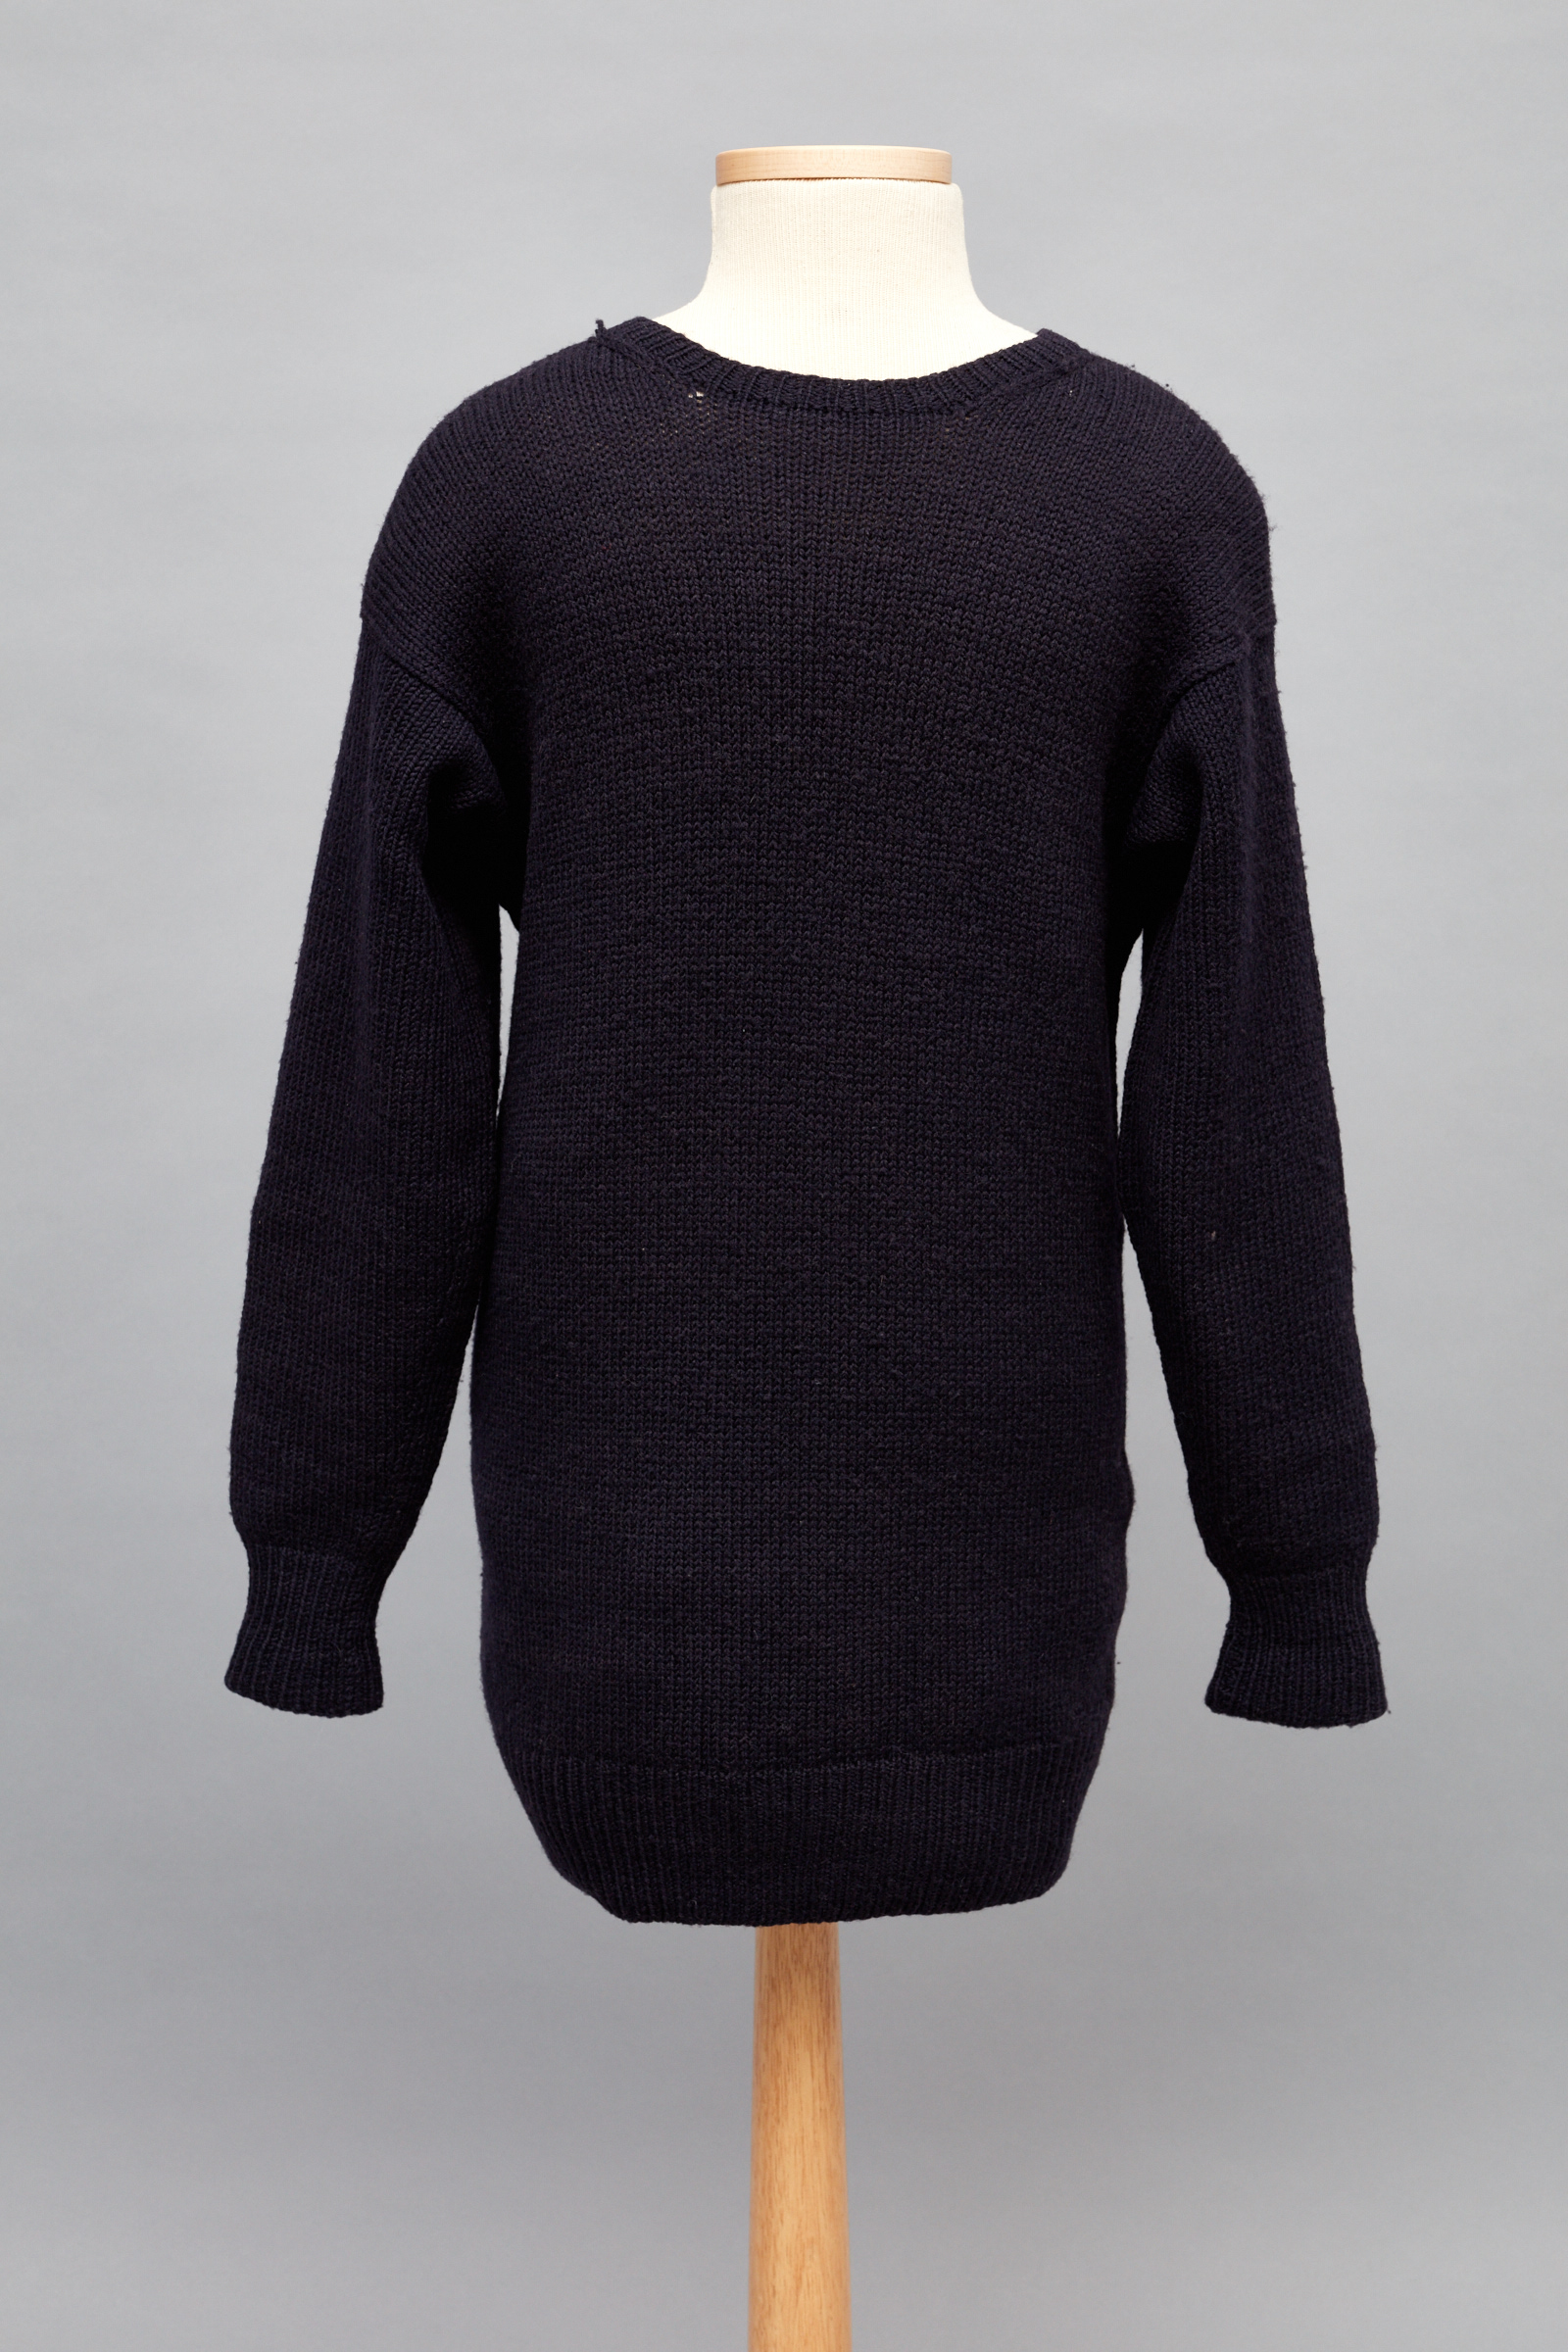 A black sweater on a wooden mannequin.